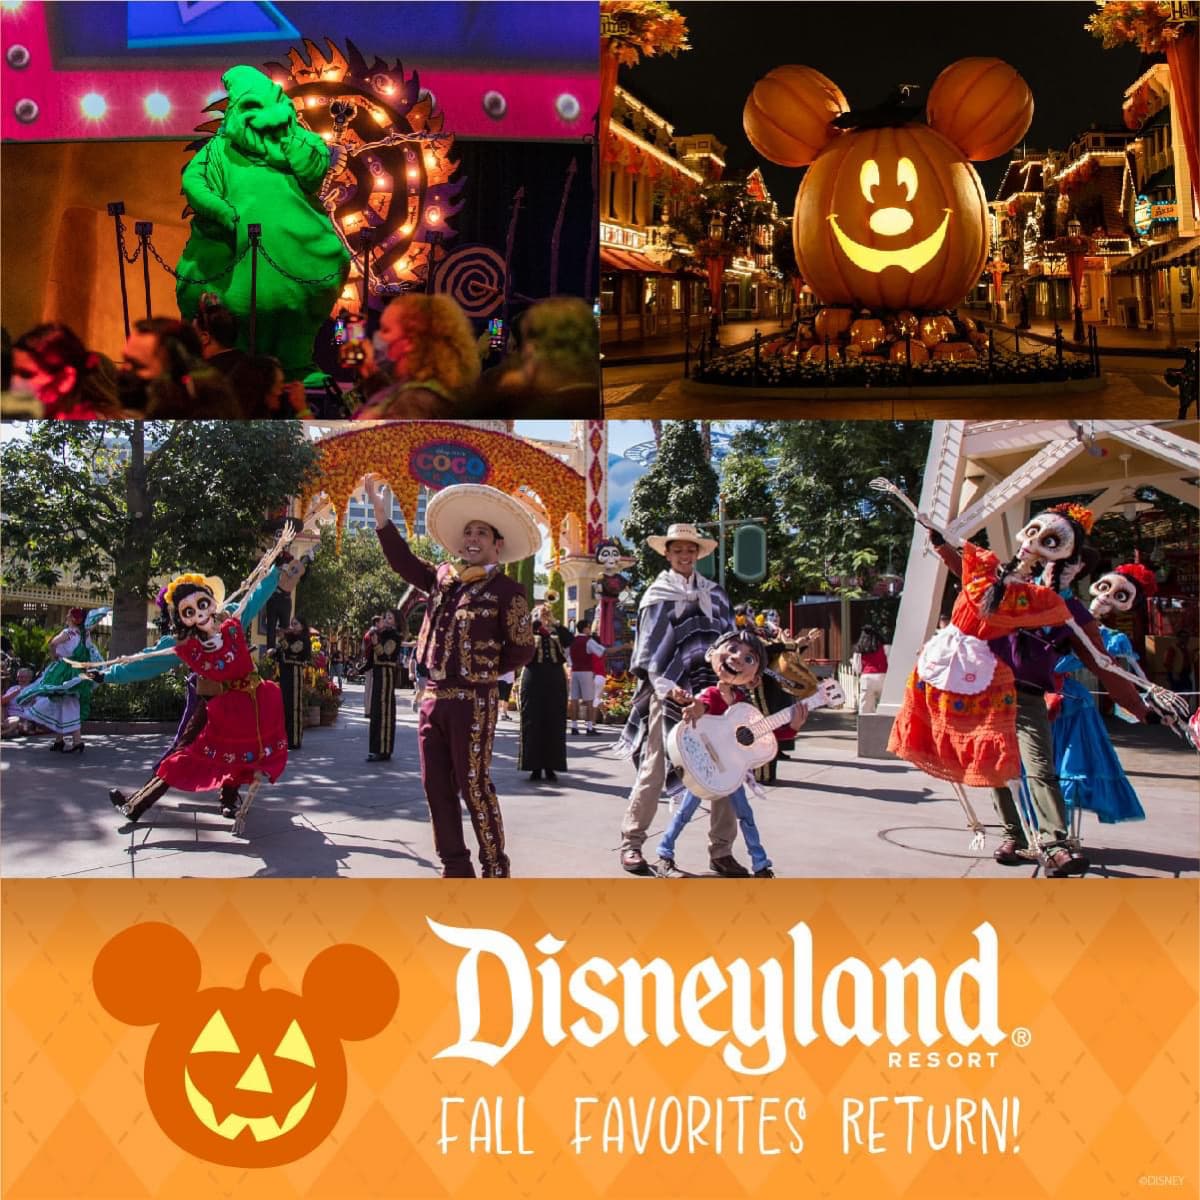 ### Disneyland Resort: Fall Favorites Return!

Experience the magic of Disneyland Resort this fall with festive decorations, vibrant costumes, and beloved characters. The seasonal attractions and shows create an unforgettable experience for visitors of all ages. 

#### Highlights of the Season:

1. **Spooky Season Fun:**
   - The top left image features a character dressed in green with a spooky setup in the background, indicating thrilling Halloween-themed entertainment.
   
2. **Enchanting Decorations:**
   - The top right image showcases Main Street adorned with festive lights and autumnal decorations, featuring a giant illuminated Mickey Mouse pumpkin that adds a magical nighttime glow.

3. **Celebration of Culture:**
   - The bottom left image captures a lively Dia de los Muertos (Day of the Dead) celebration with dancers in colorful costumes, performing traditional dances, and engaging with guests.

4. **Family Fun:**
   - The bottom right image depicts families enjoying the festivities, with children and adults alike experiencing the joy and excitement through music and dance.

#### Join the Celebration:
The banner at the bottom proudly announces, "Disneyland Resort - Fall Favorites Return!" with a classic Mickey Mouse pumpkin icon. This fall, immerse yourself in the wonder and excitement that Disneyland Resort has to offer!

Make sure to plan your visit and experience the enchanting fall transformation at Disneyland Resort. For more information and tickets, visit our official website.